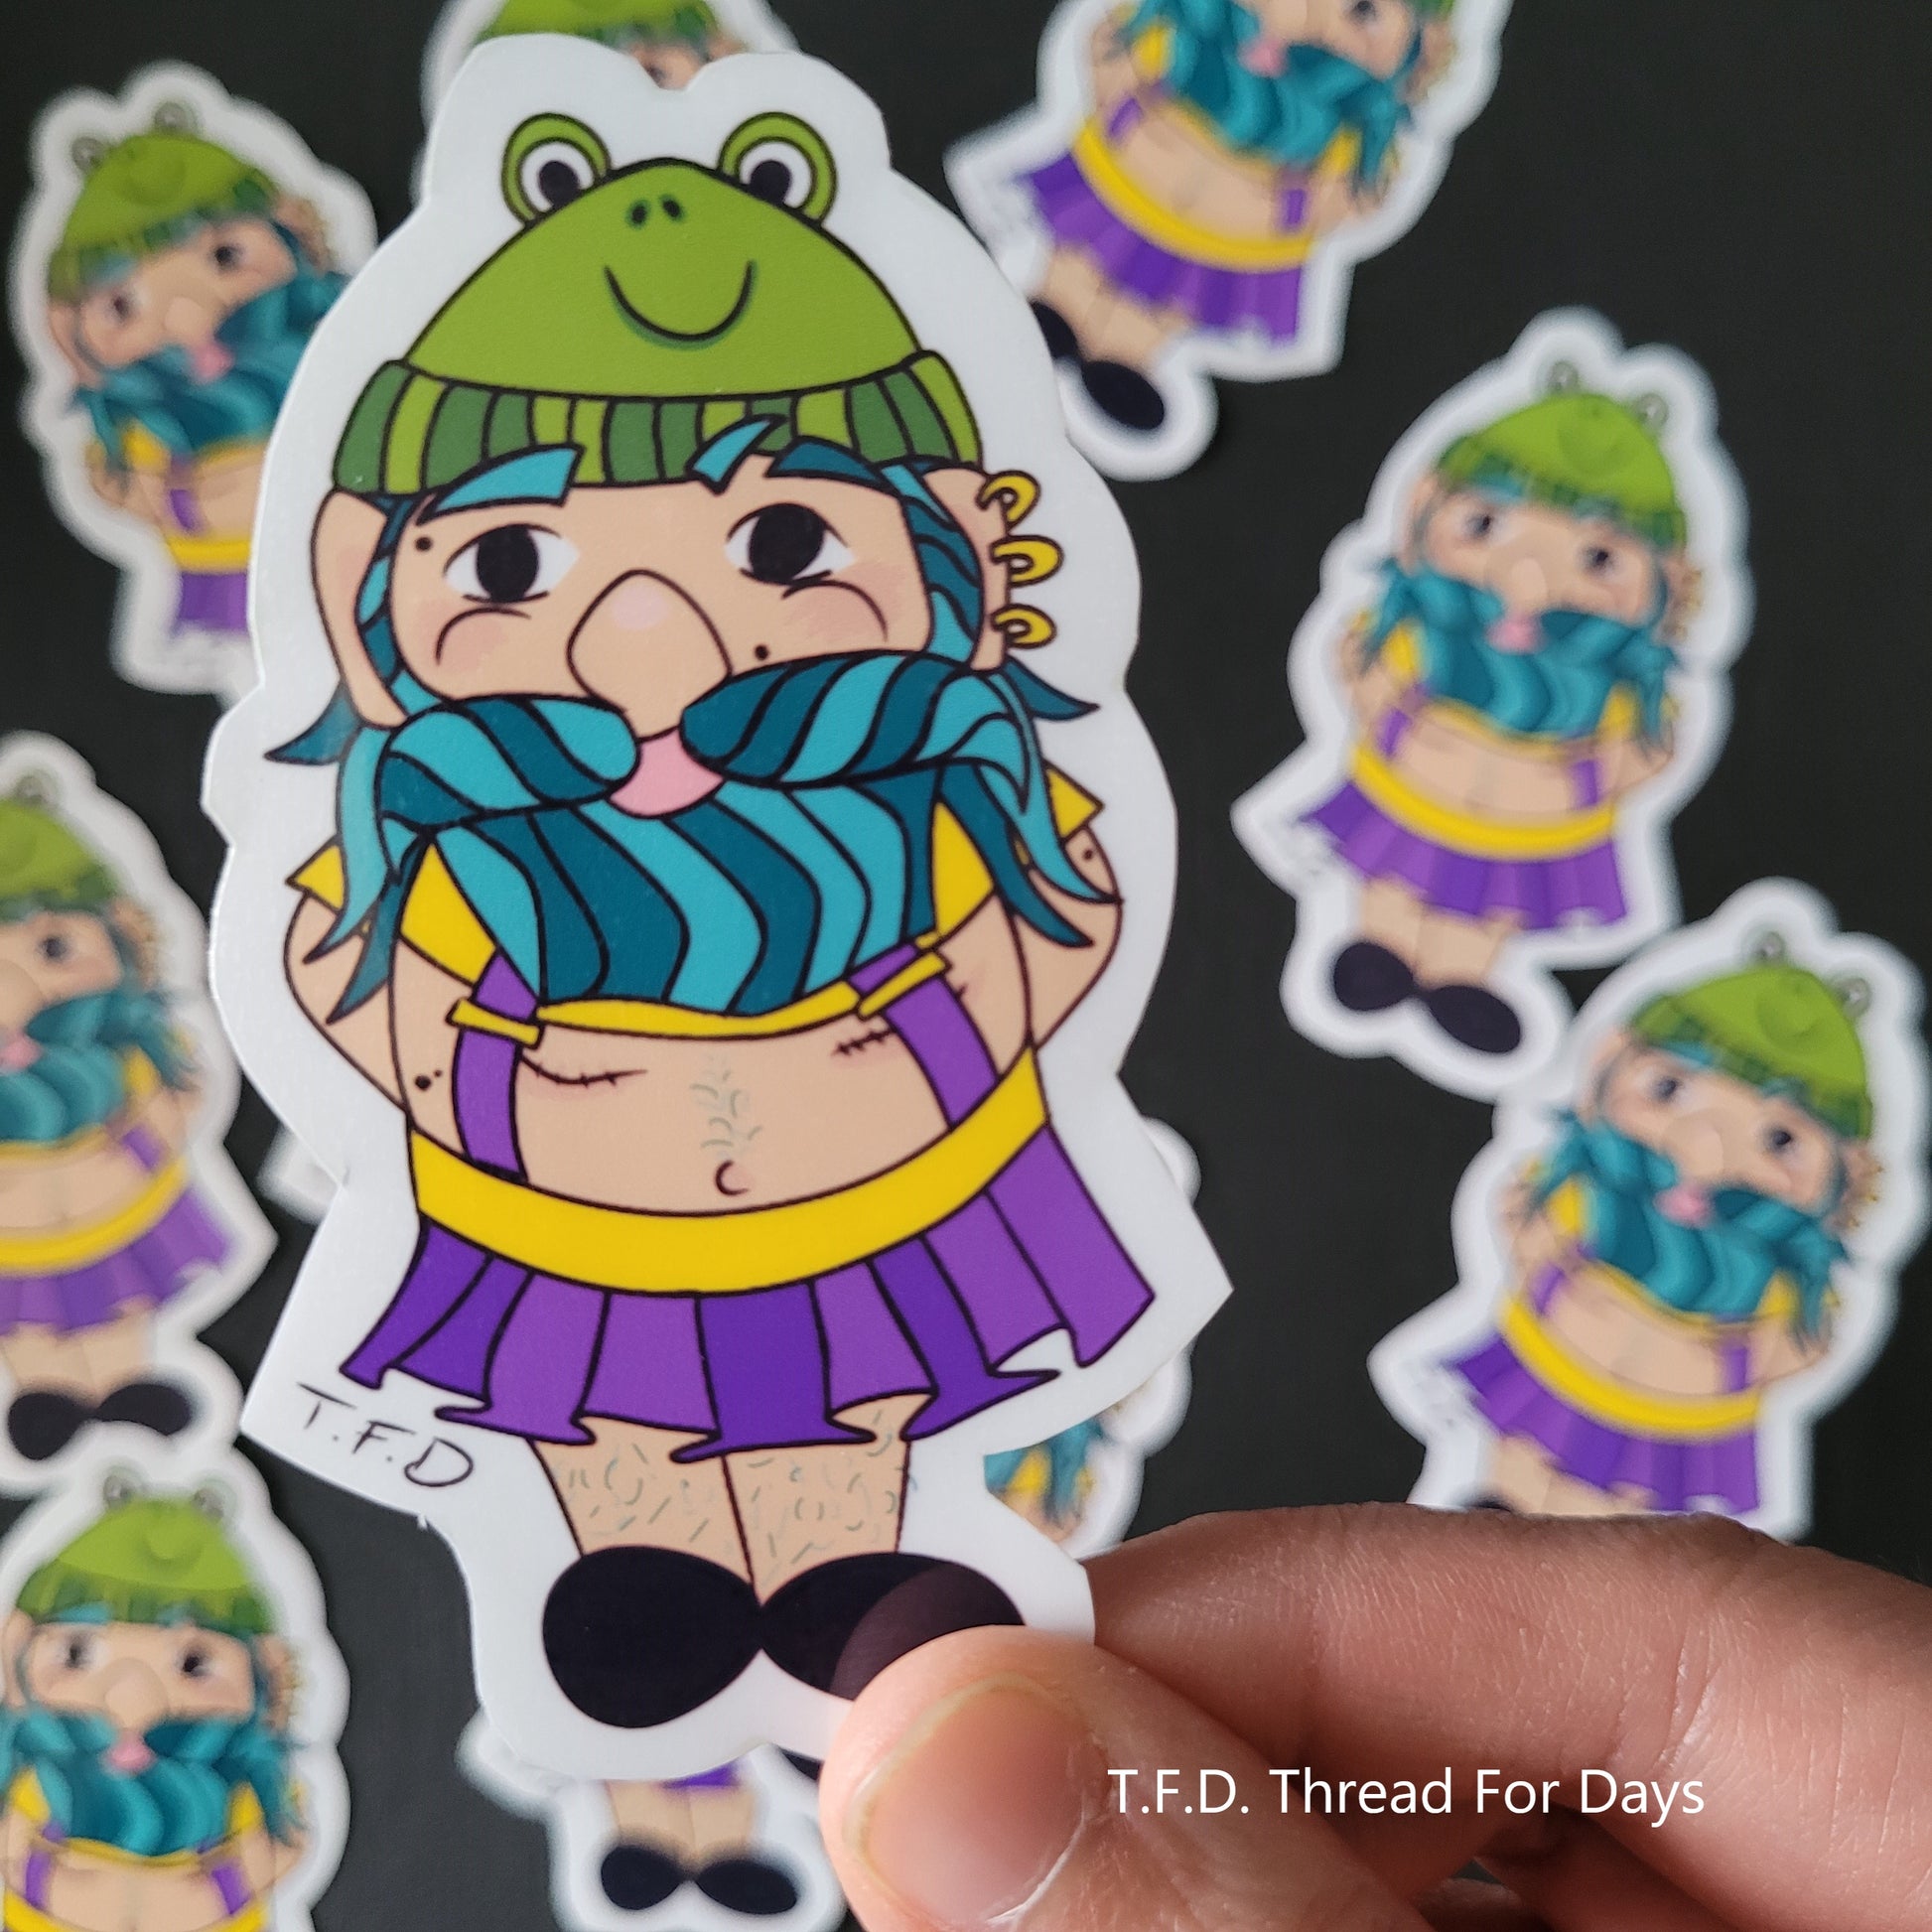 non-binary gnome sticker held between fingers